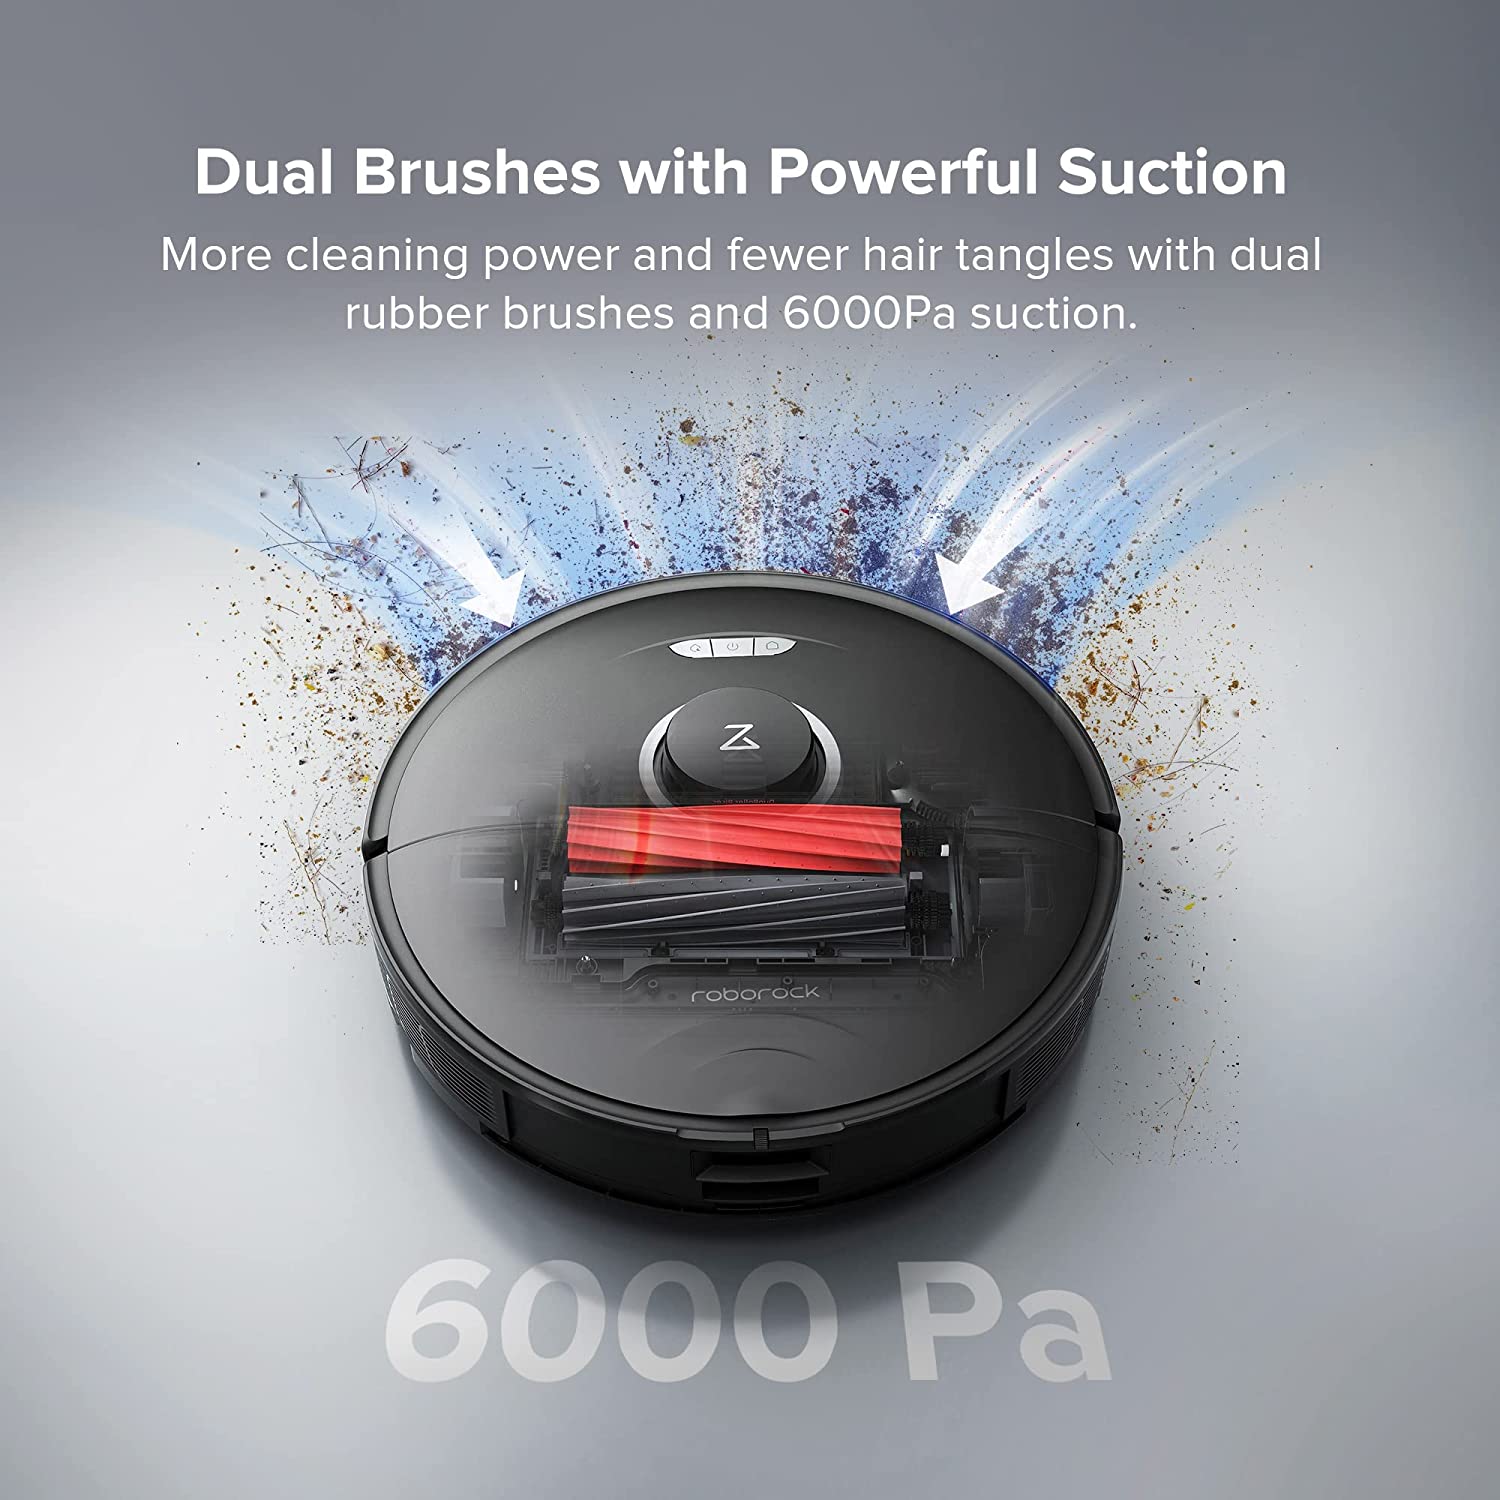 Roborock S8 Pro Ultra Robot Vacuum and Mop, Auto-Drying, Self-Washing, Liftable Dual Brush & Sonic Mop, 6000Pa Suction, Self-Refilling, Self-Emptying, Reactive 3D Obstacle Avoidance, Black